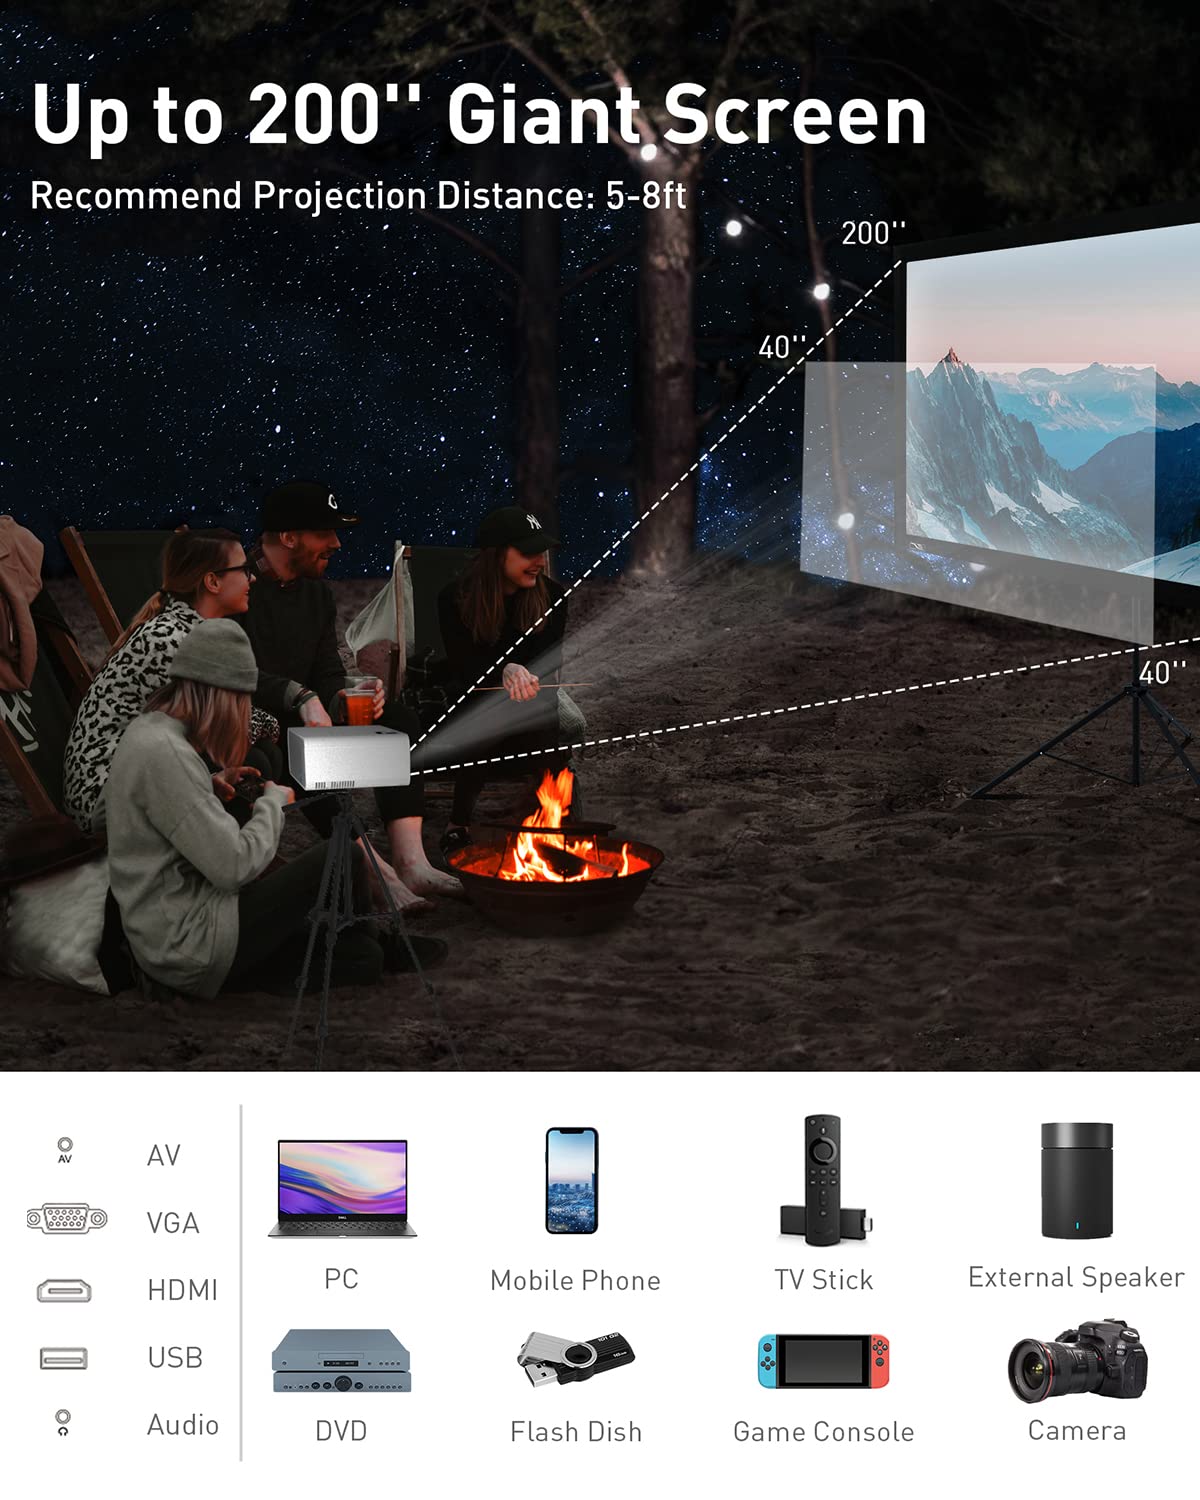 Mini Projector, Portable WiFi Movie Projector for Outdoor Use, 8000L 1080P HD and 200'' Screen Supported, with Great Sound Quality for Home Theater Video, Compatible with iPhone/iOS/Android/HDMI/TV